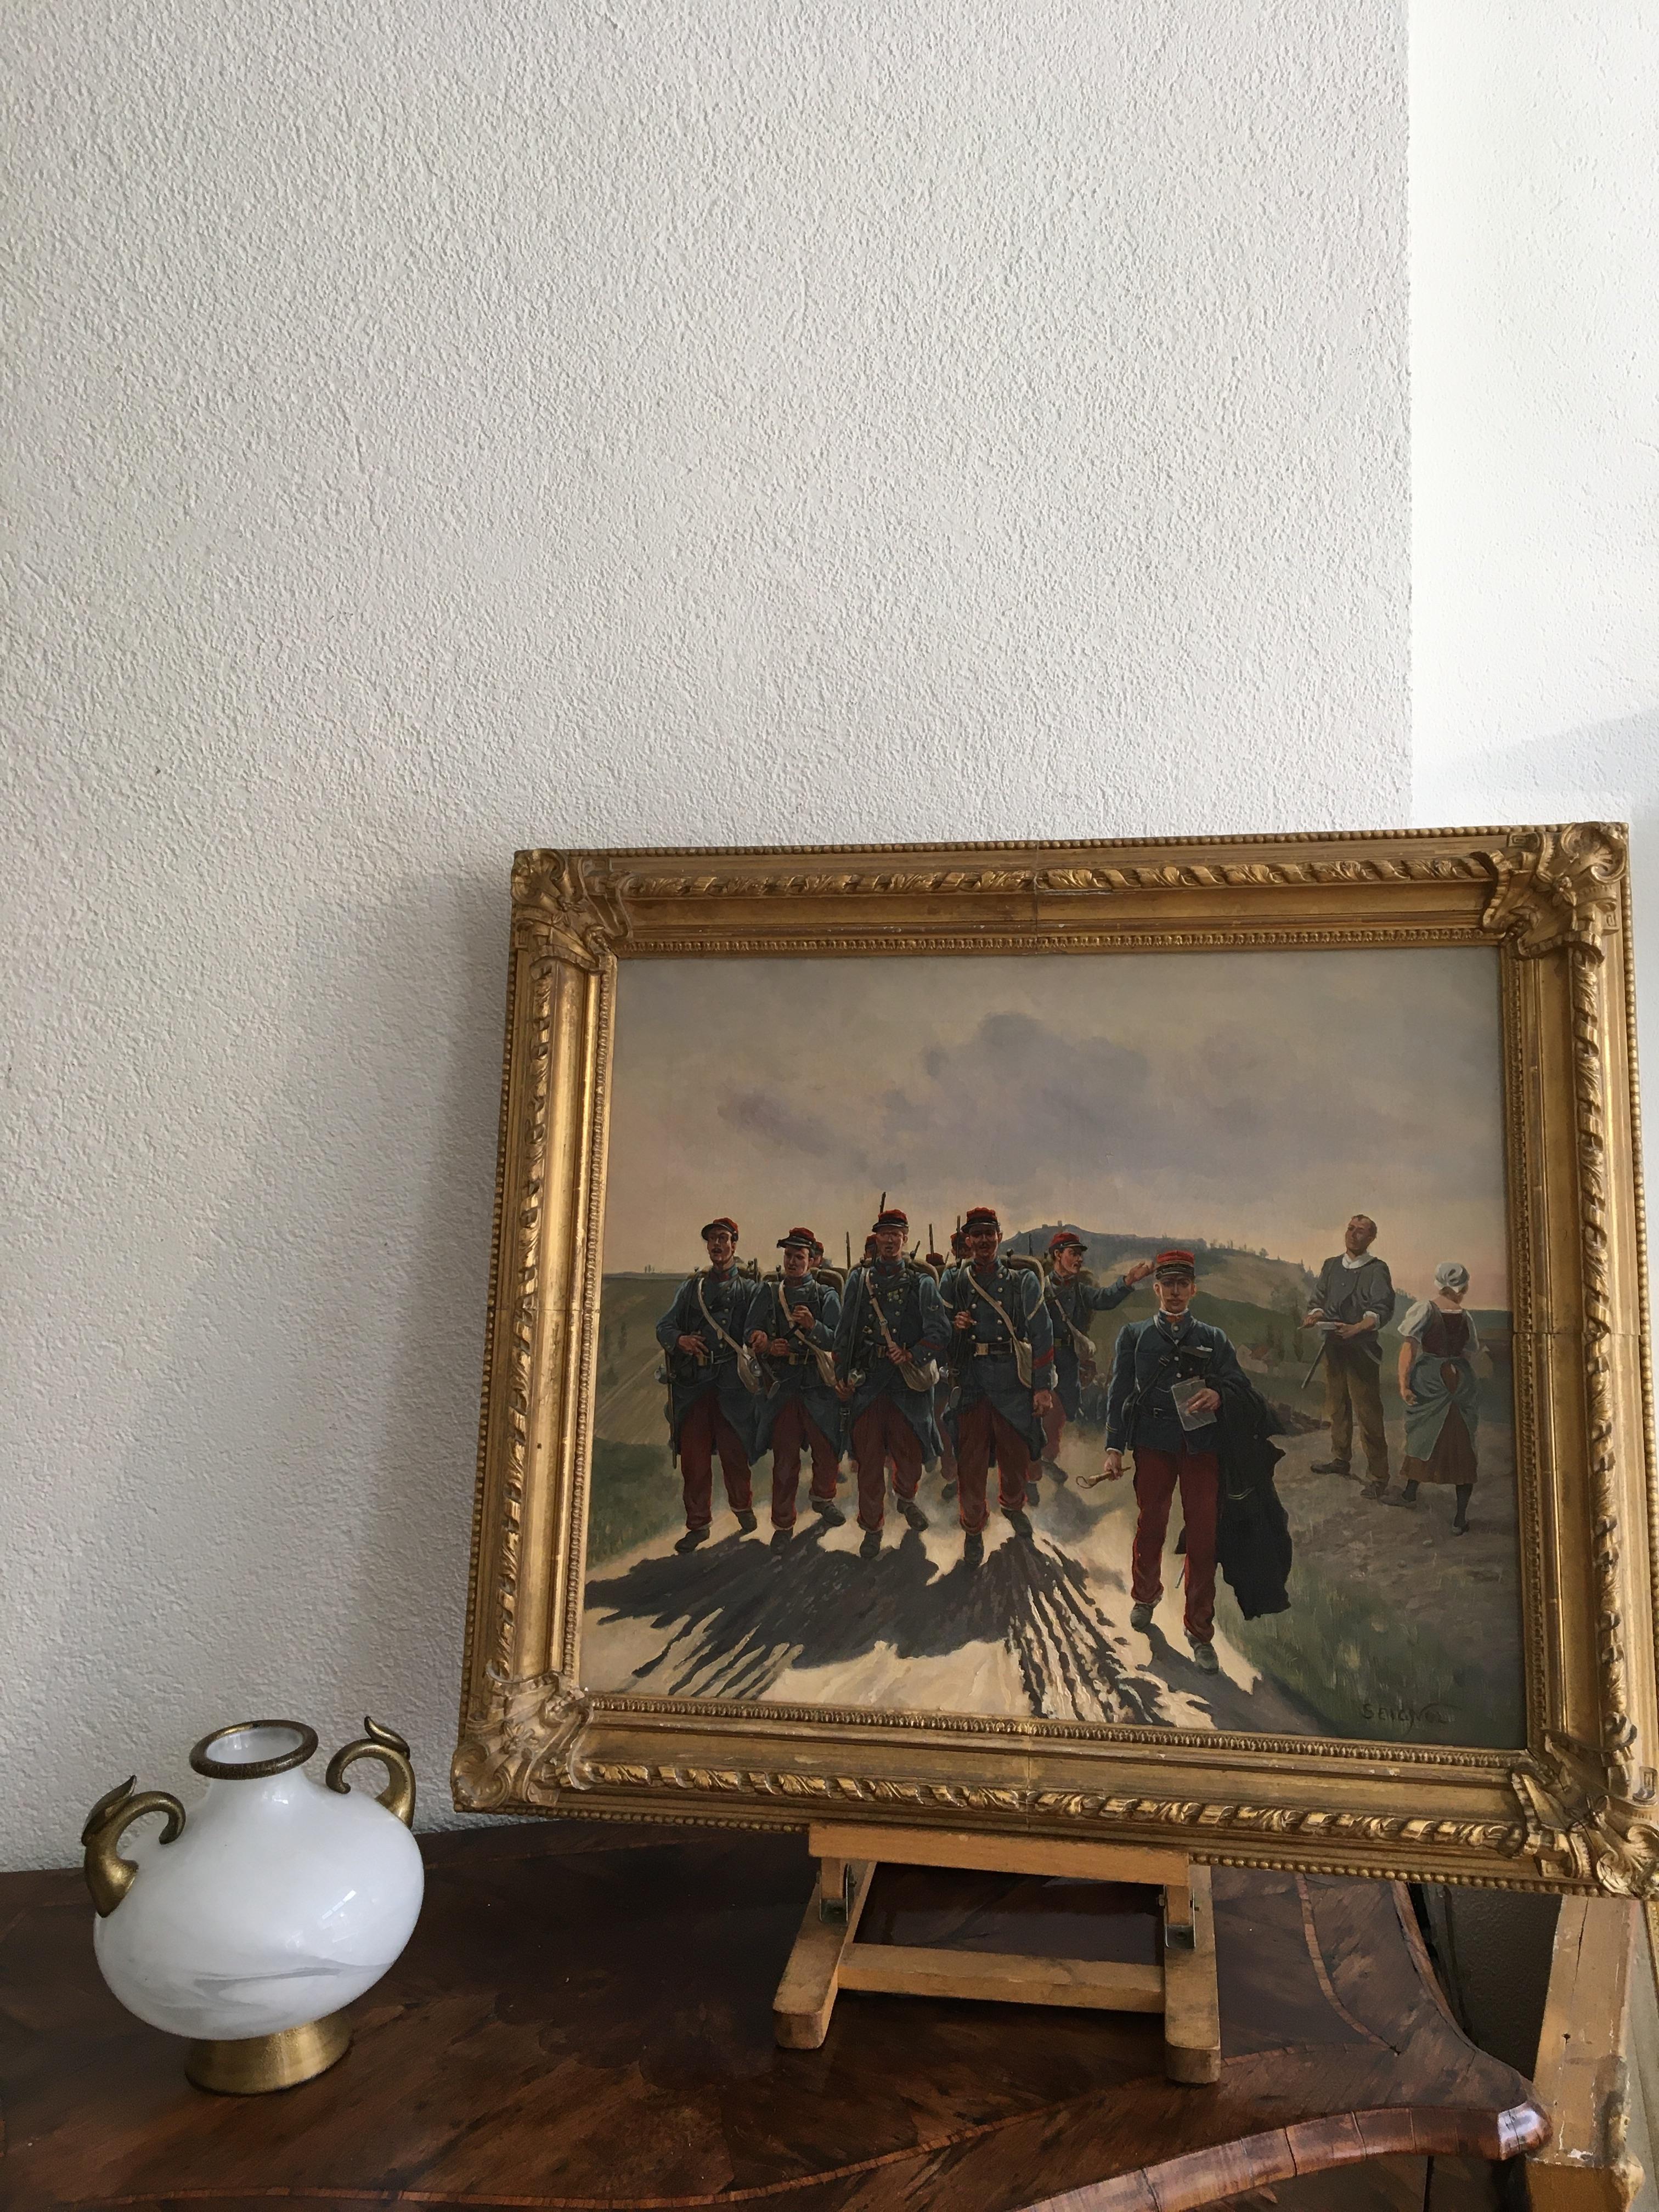 Departure of the infantrymen for the war of 14 - Painting by Claudius Seignol